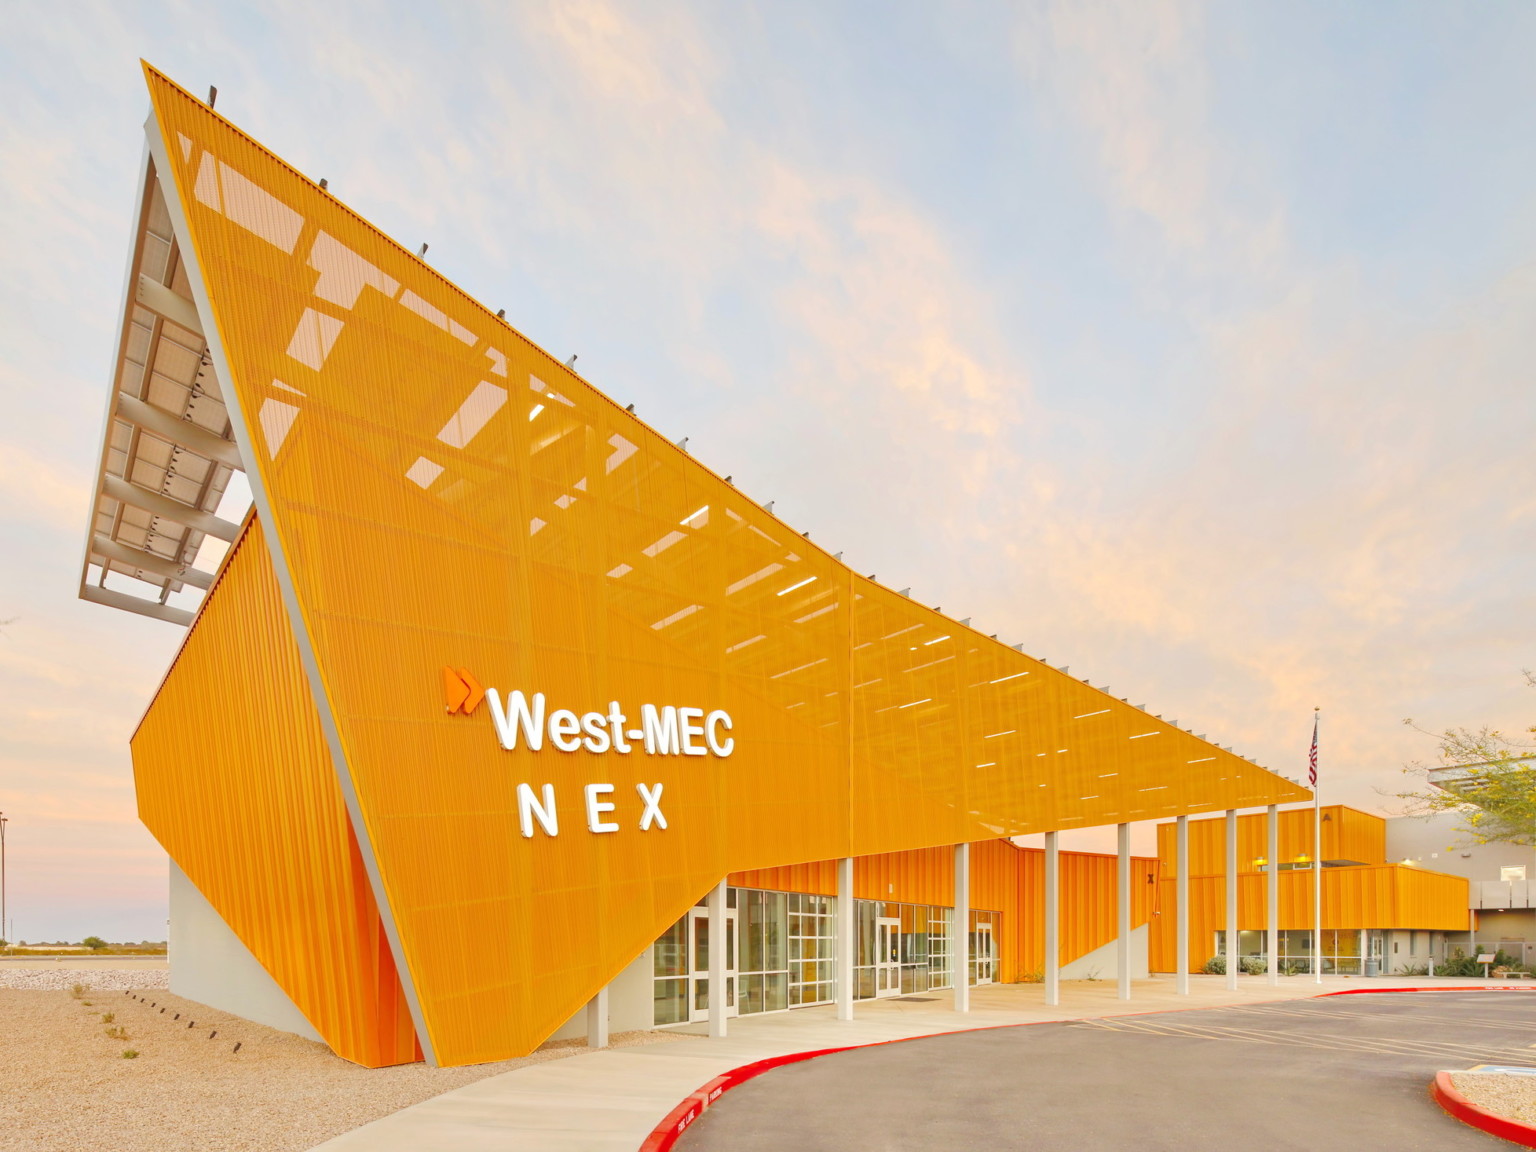 West-MEC NEX building at the Southwest Campus, an angular yellow building with sunscreen across the front with white sign